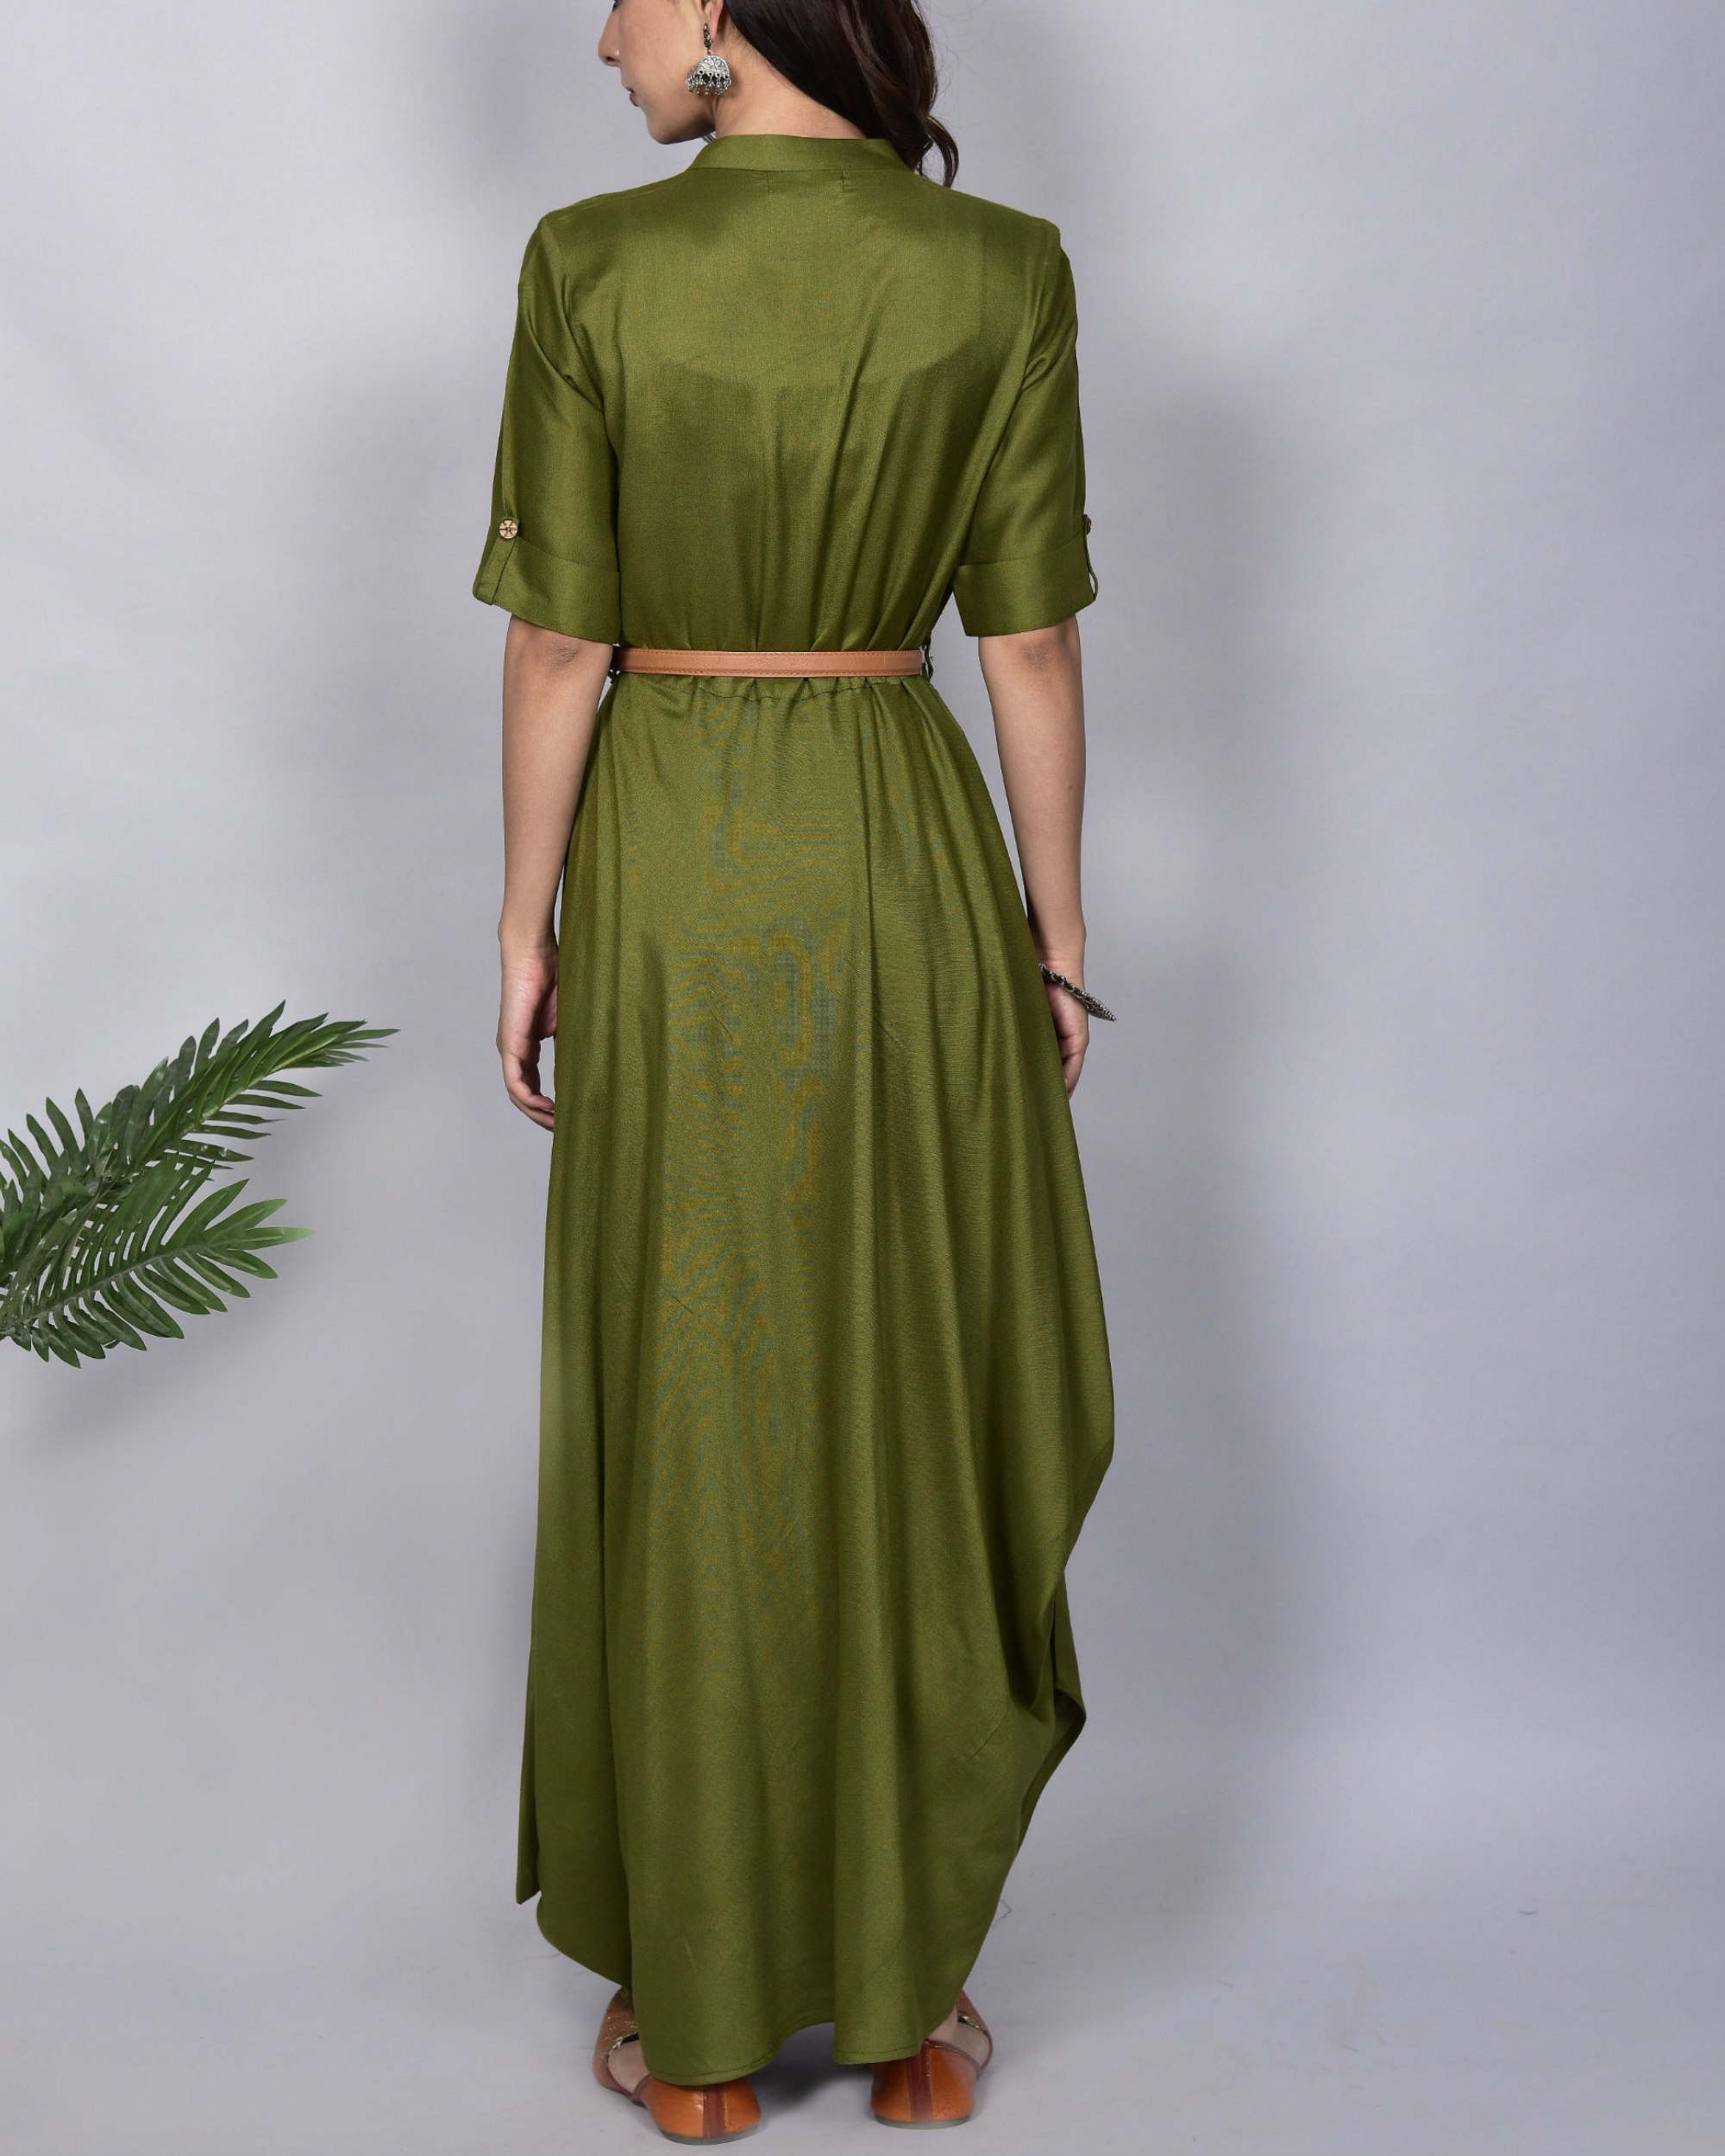 Olive green maxi dress with leather belt by Empress Pitara The Secret